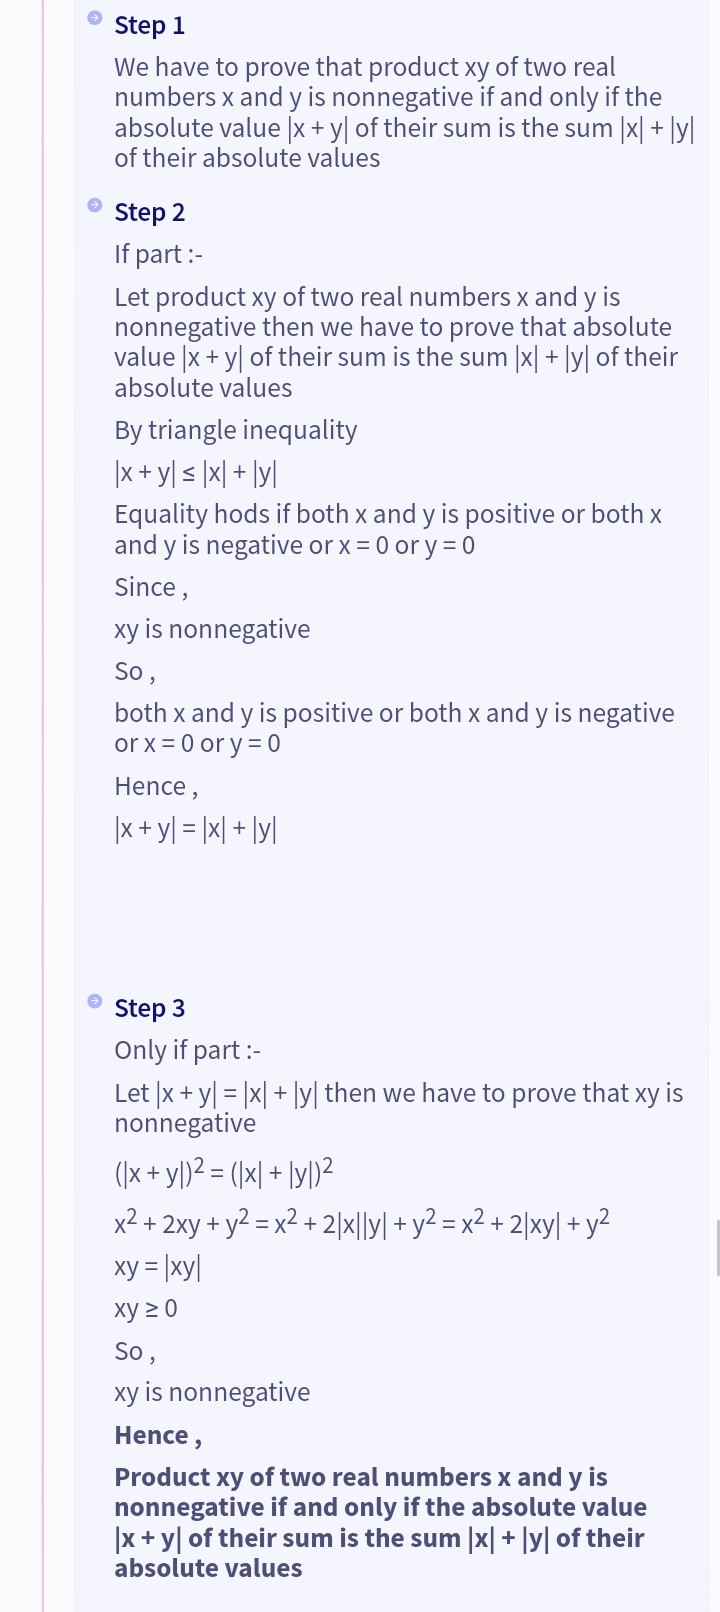 Step 1
We have to prove that product xy of two real
numbers x and y is nonnegative if and only if the
absolute value |x + y of their sum is the sum |x| + |y|
of their absolute values
Step 2
If part :-
Let product xy of two real numbers x and y is
nonnegative then we have to prove that absolute
value x + y of their sum is the sum |x| + |y| of their
absolute values
By triangle inequality
|x + y ≤ |x|+|yl|
Equality hods if both x and y is positive or both x
and y is negative or x = 0 or y = 0
Since,
xy is nonnegative
So,
both x and y is positive or both x and y is negative
or x = 0 ory=0
Hence,
|x + y = |x|+|y|
Step 3
Only if part :-
Let |x + y = |x|+|y| then we have to prove that xy is
nonnegative
(x + y)² = (x + y)²
x² + 2xy + y² = x² +2|x||y| + y² = x² + 2|xy| + y²
xy = |xy|
xy ≥ 0
So,
xy is nonnegative
Hence,
Product xy of two real numbers x and y is
nonnegative if and only if the absolute value
|x + y of their sum is the sum |x| + |y| of their
absolute values